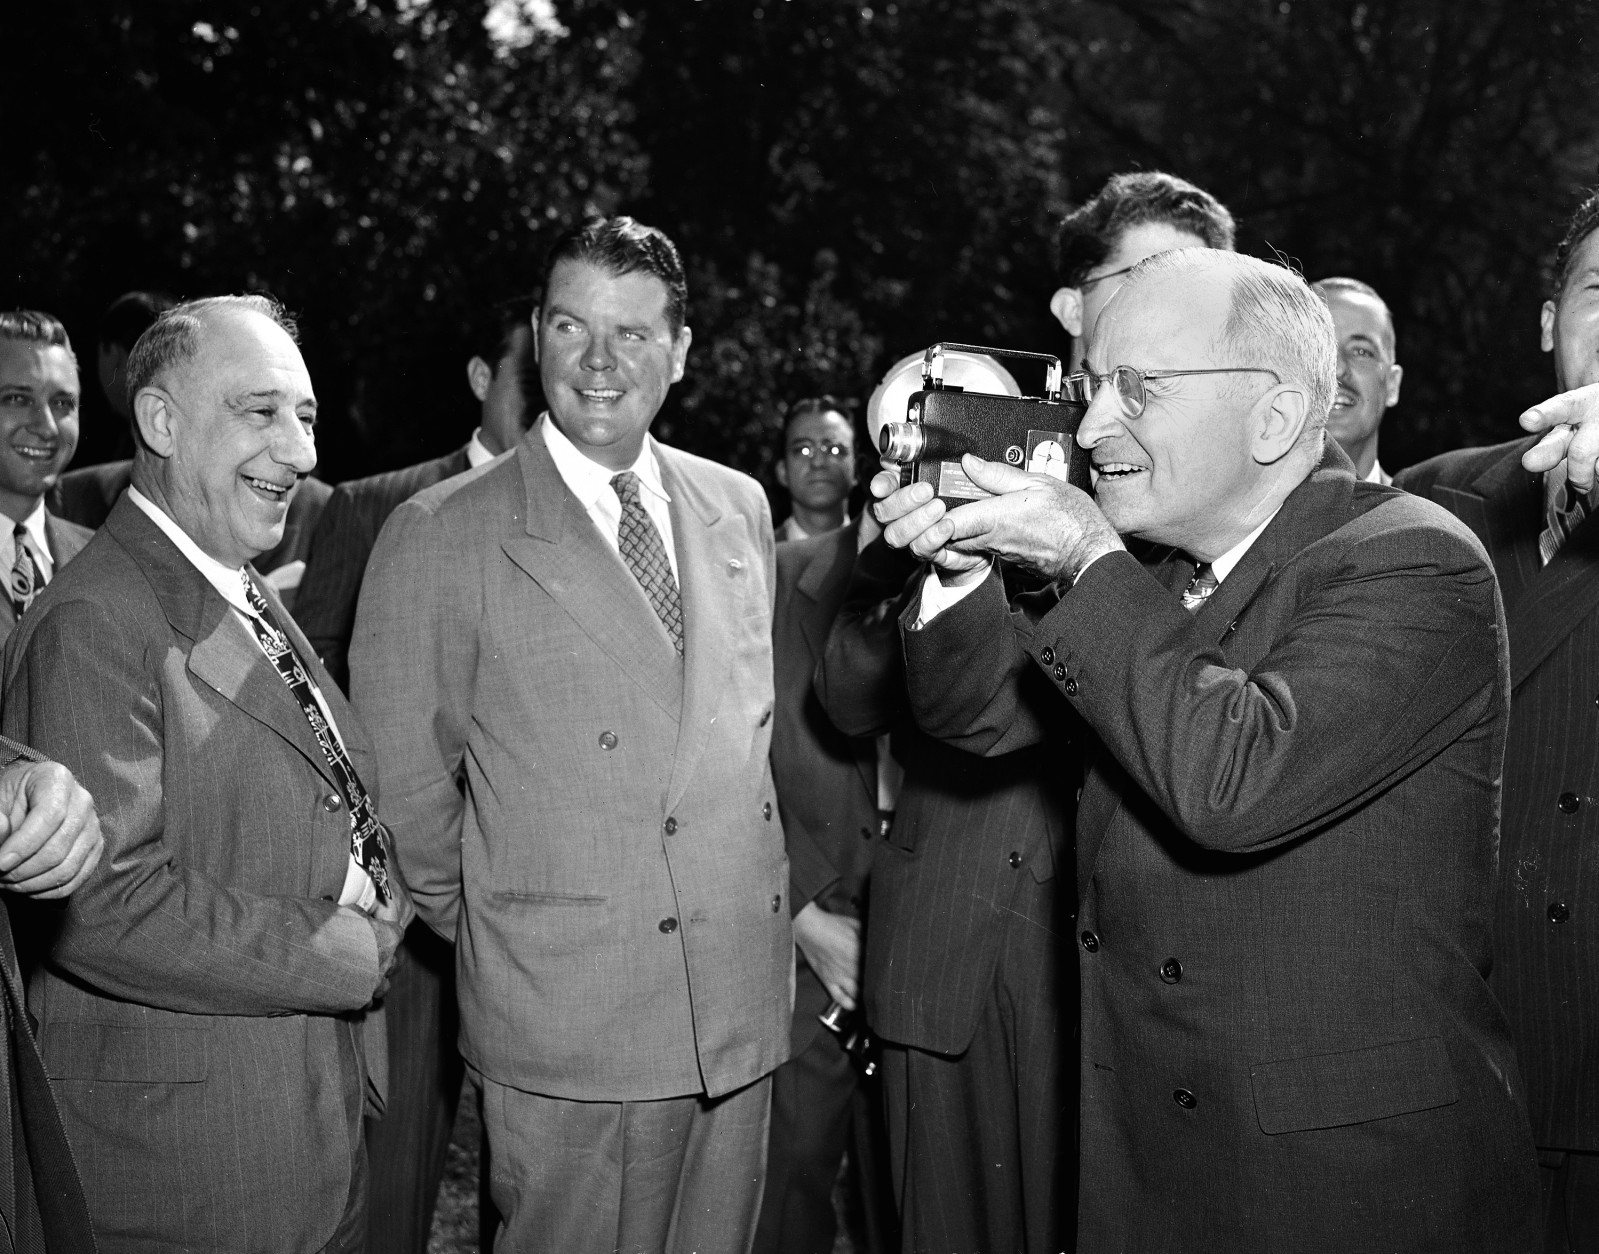 President Harry Truman operates a movie camera during a picture-taking session on the south grounds of the White House, Oct. 5, 1947.  The subjects were members of the White House News Photographers' Association, who presented the movie camera and a still camera to the president in a brief ceremony.  Others are unidentified.  (AP Photo/Harvey Georges)